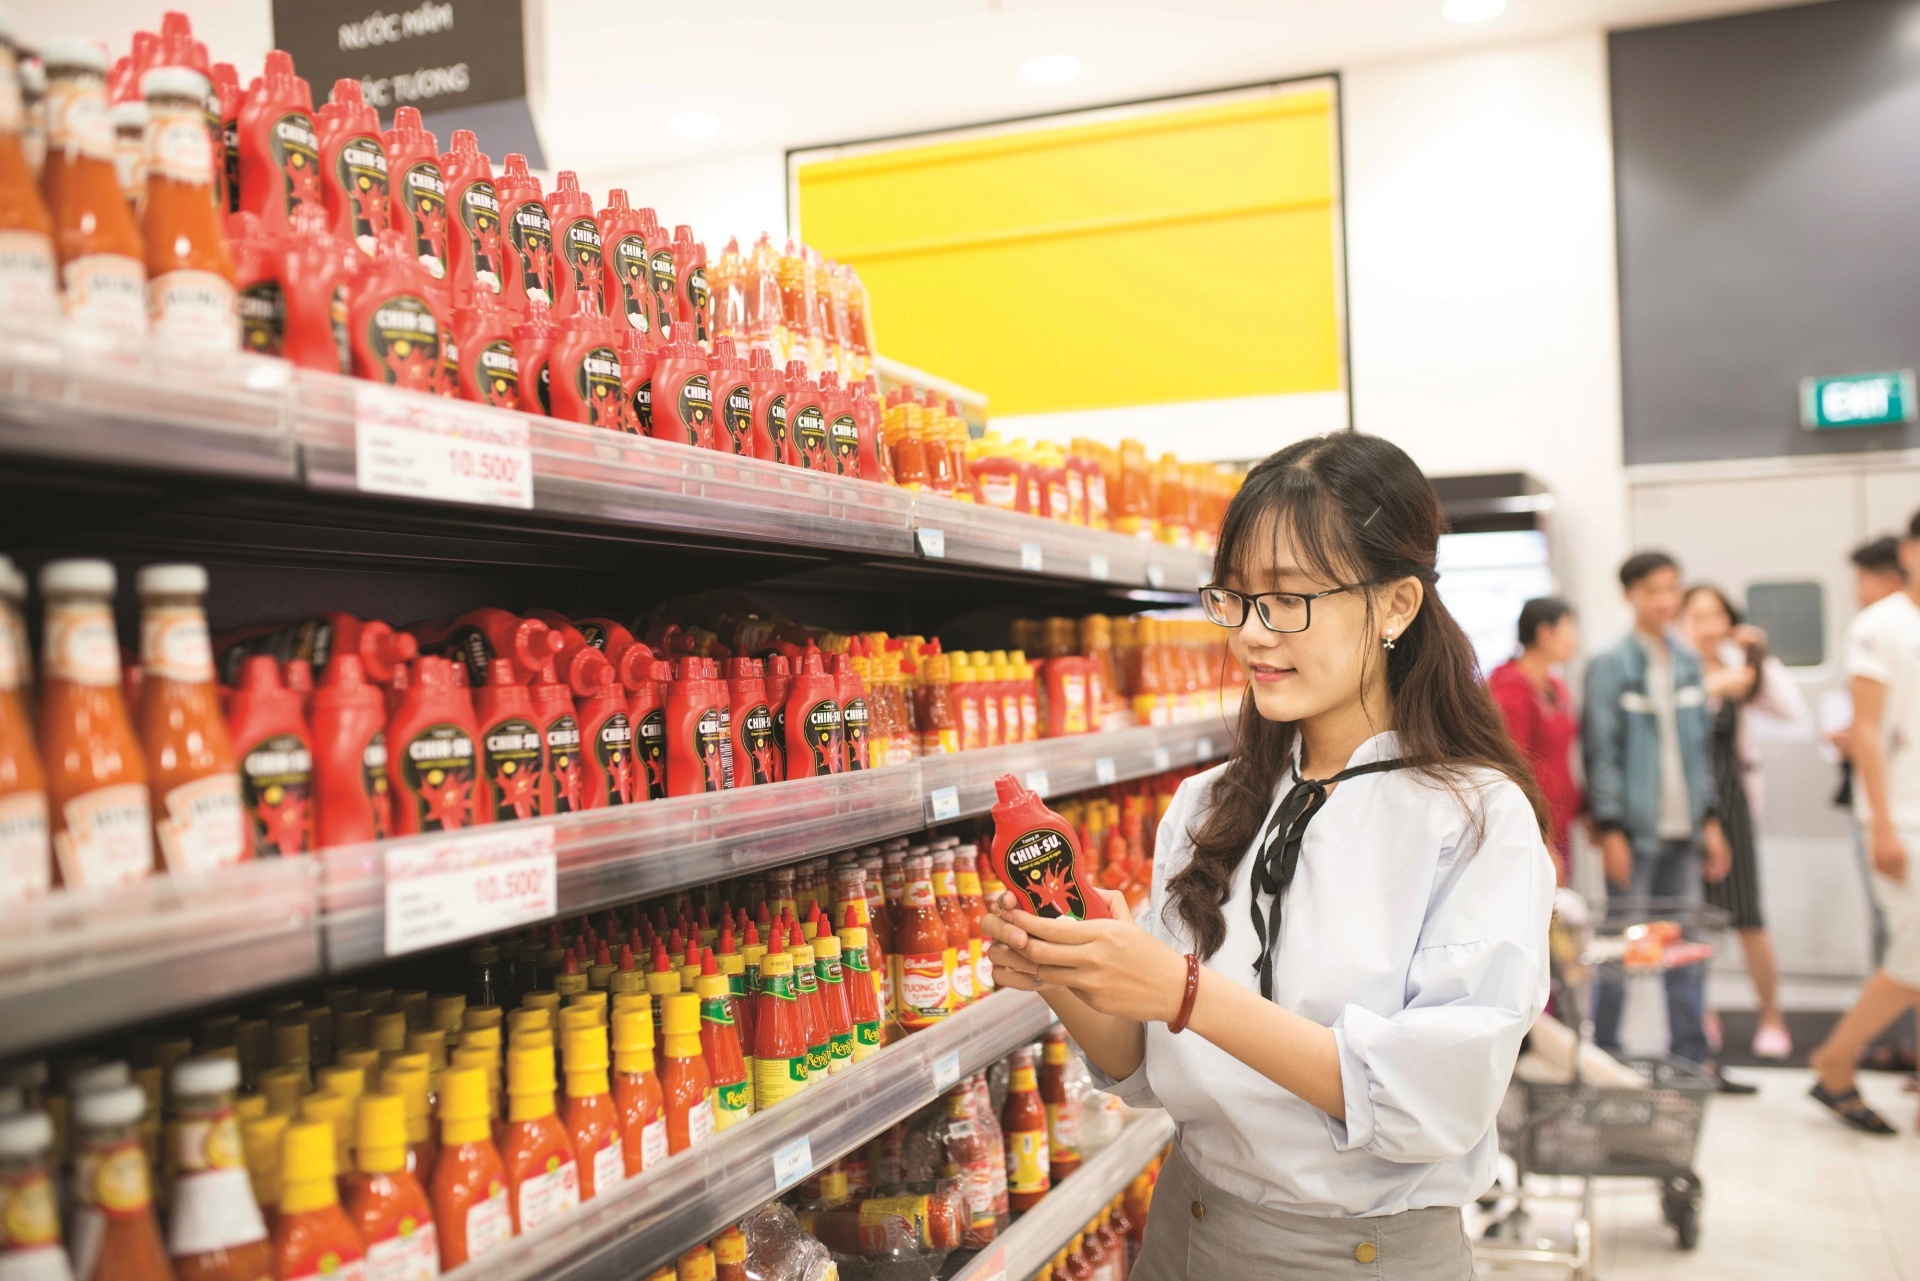 FMCG groups focus on trends to expand activities